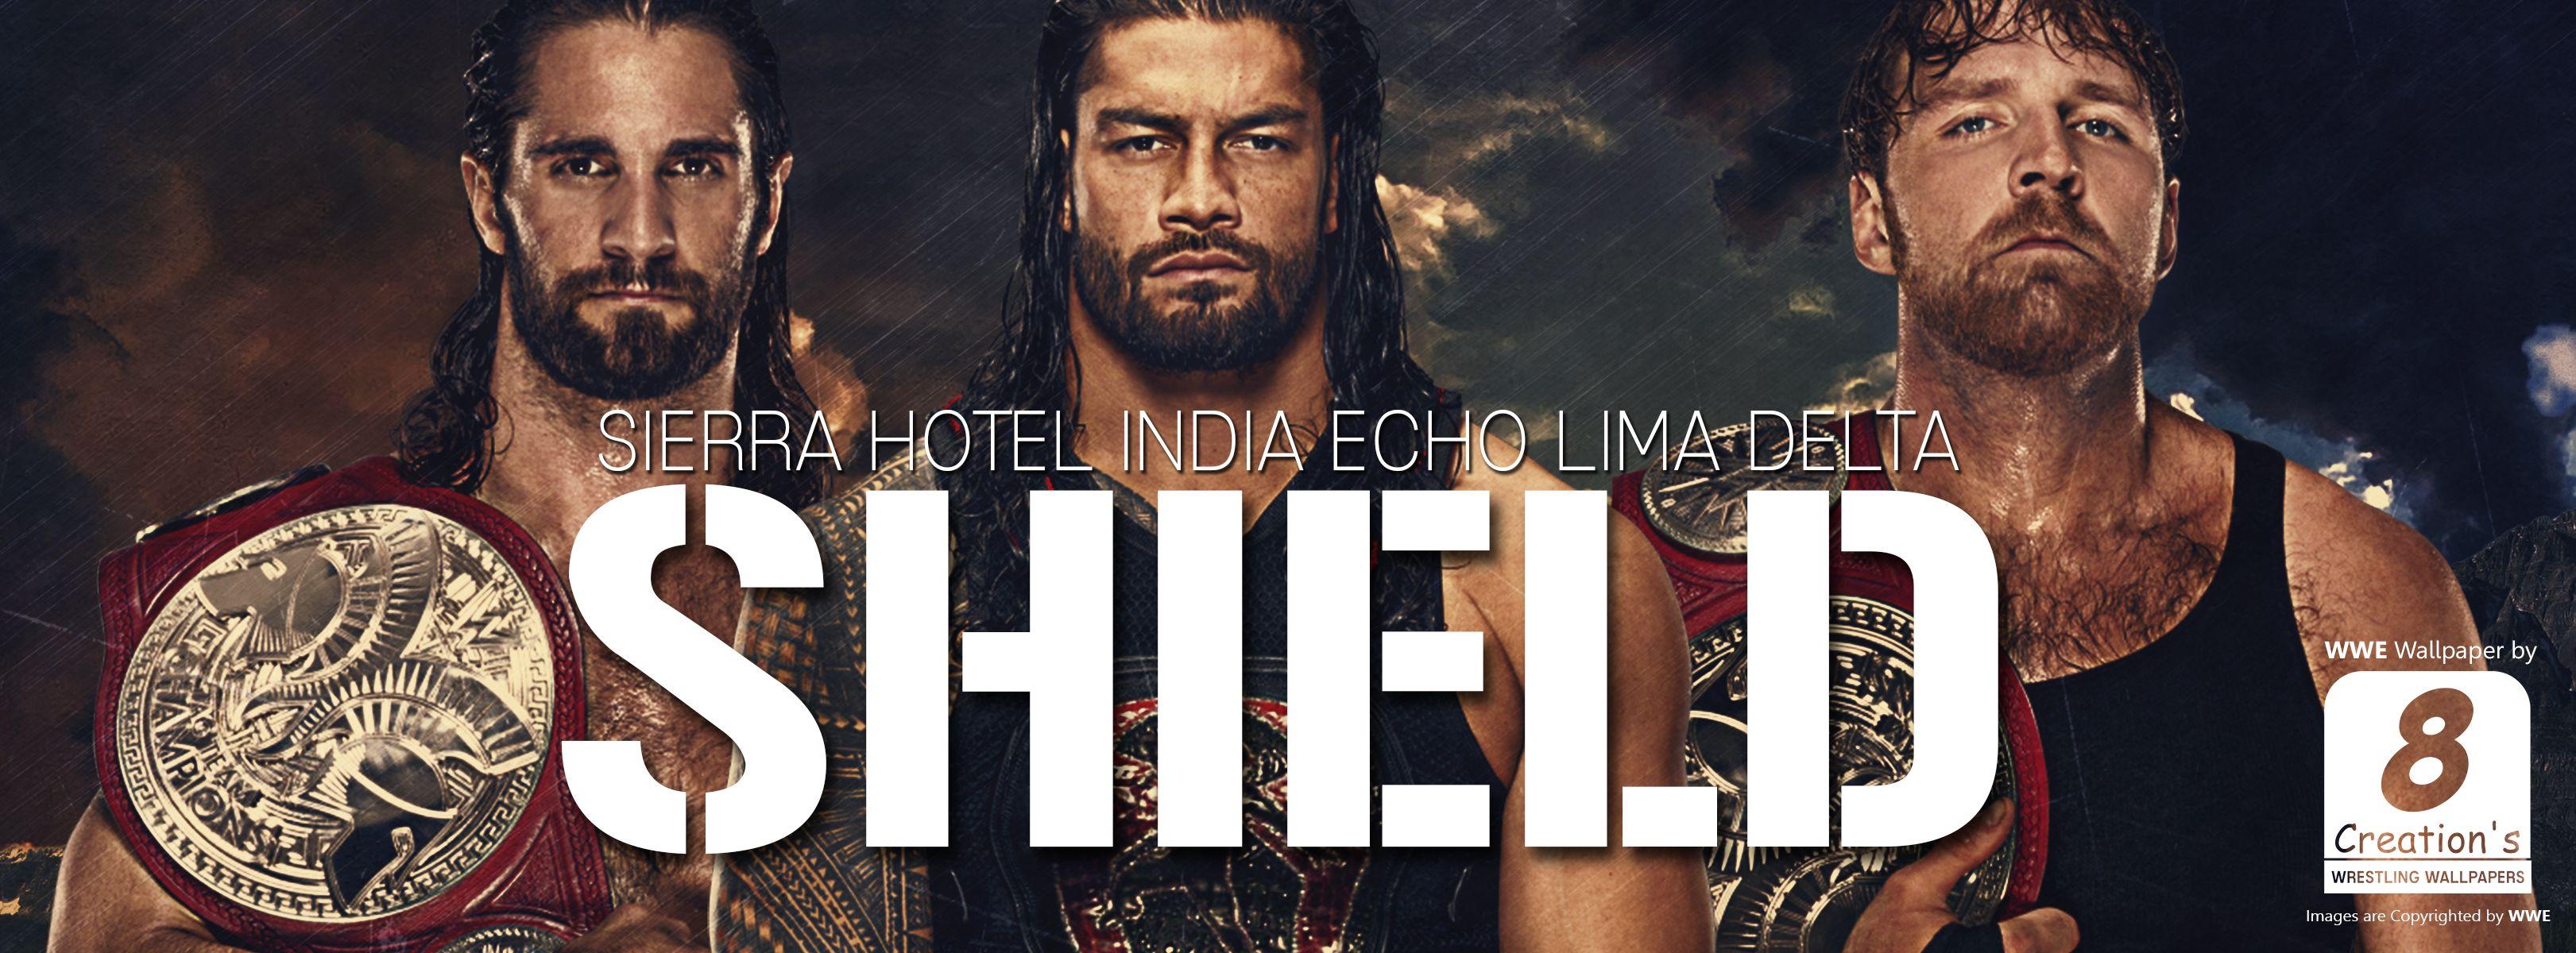 WWE SHIELD 2017 Facebook Cover Photo